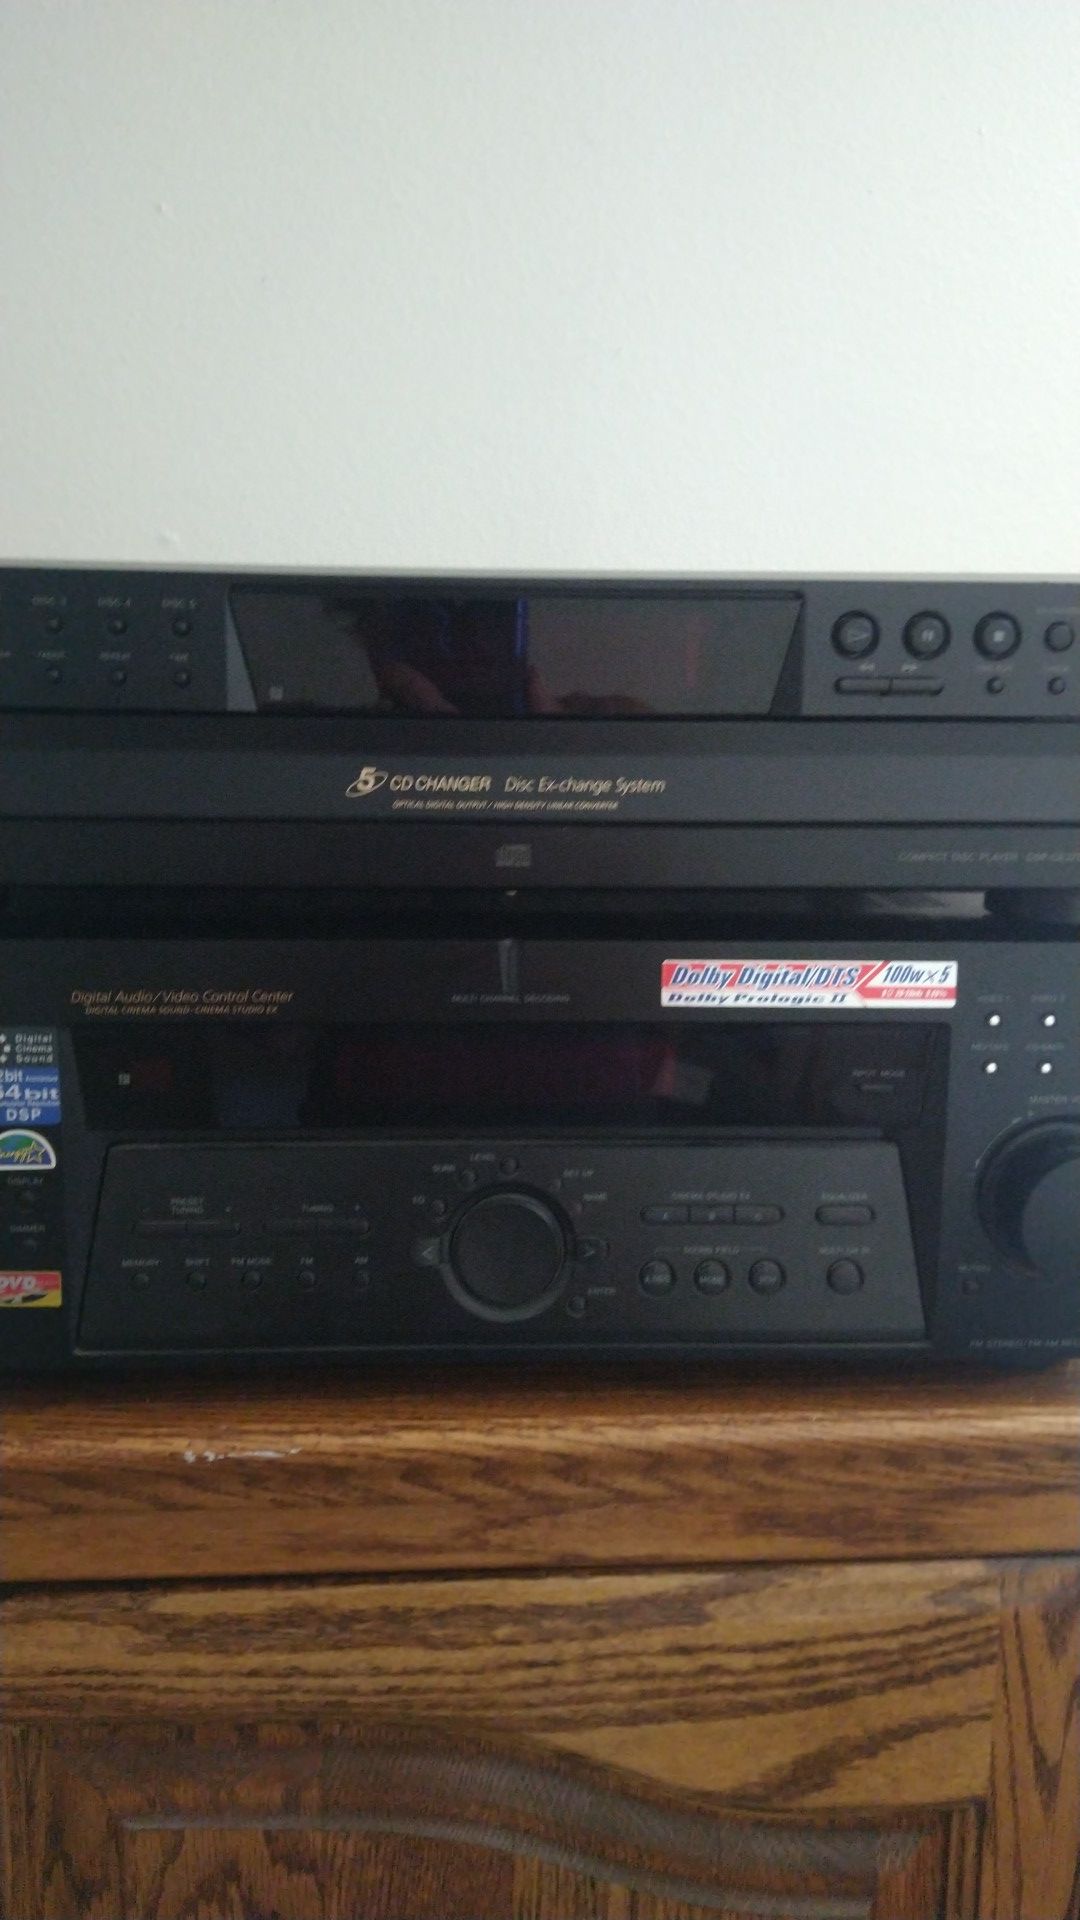 1..Sony Receiver...and 1..5 disc C.D. Changer. They are both in very good condition they are both Sony products.. selling both together for 35.00..